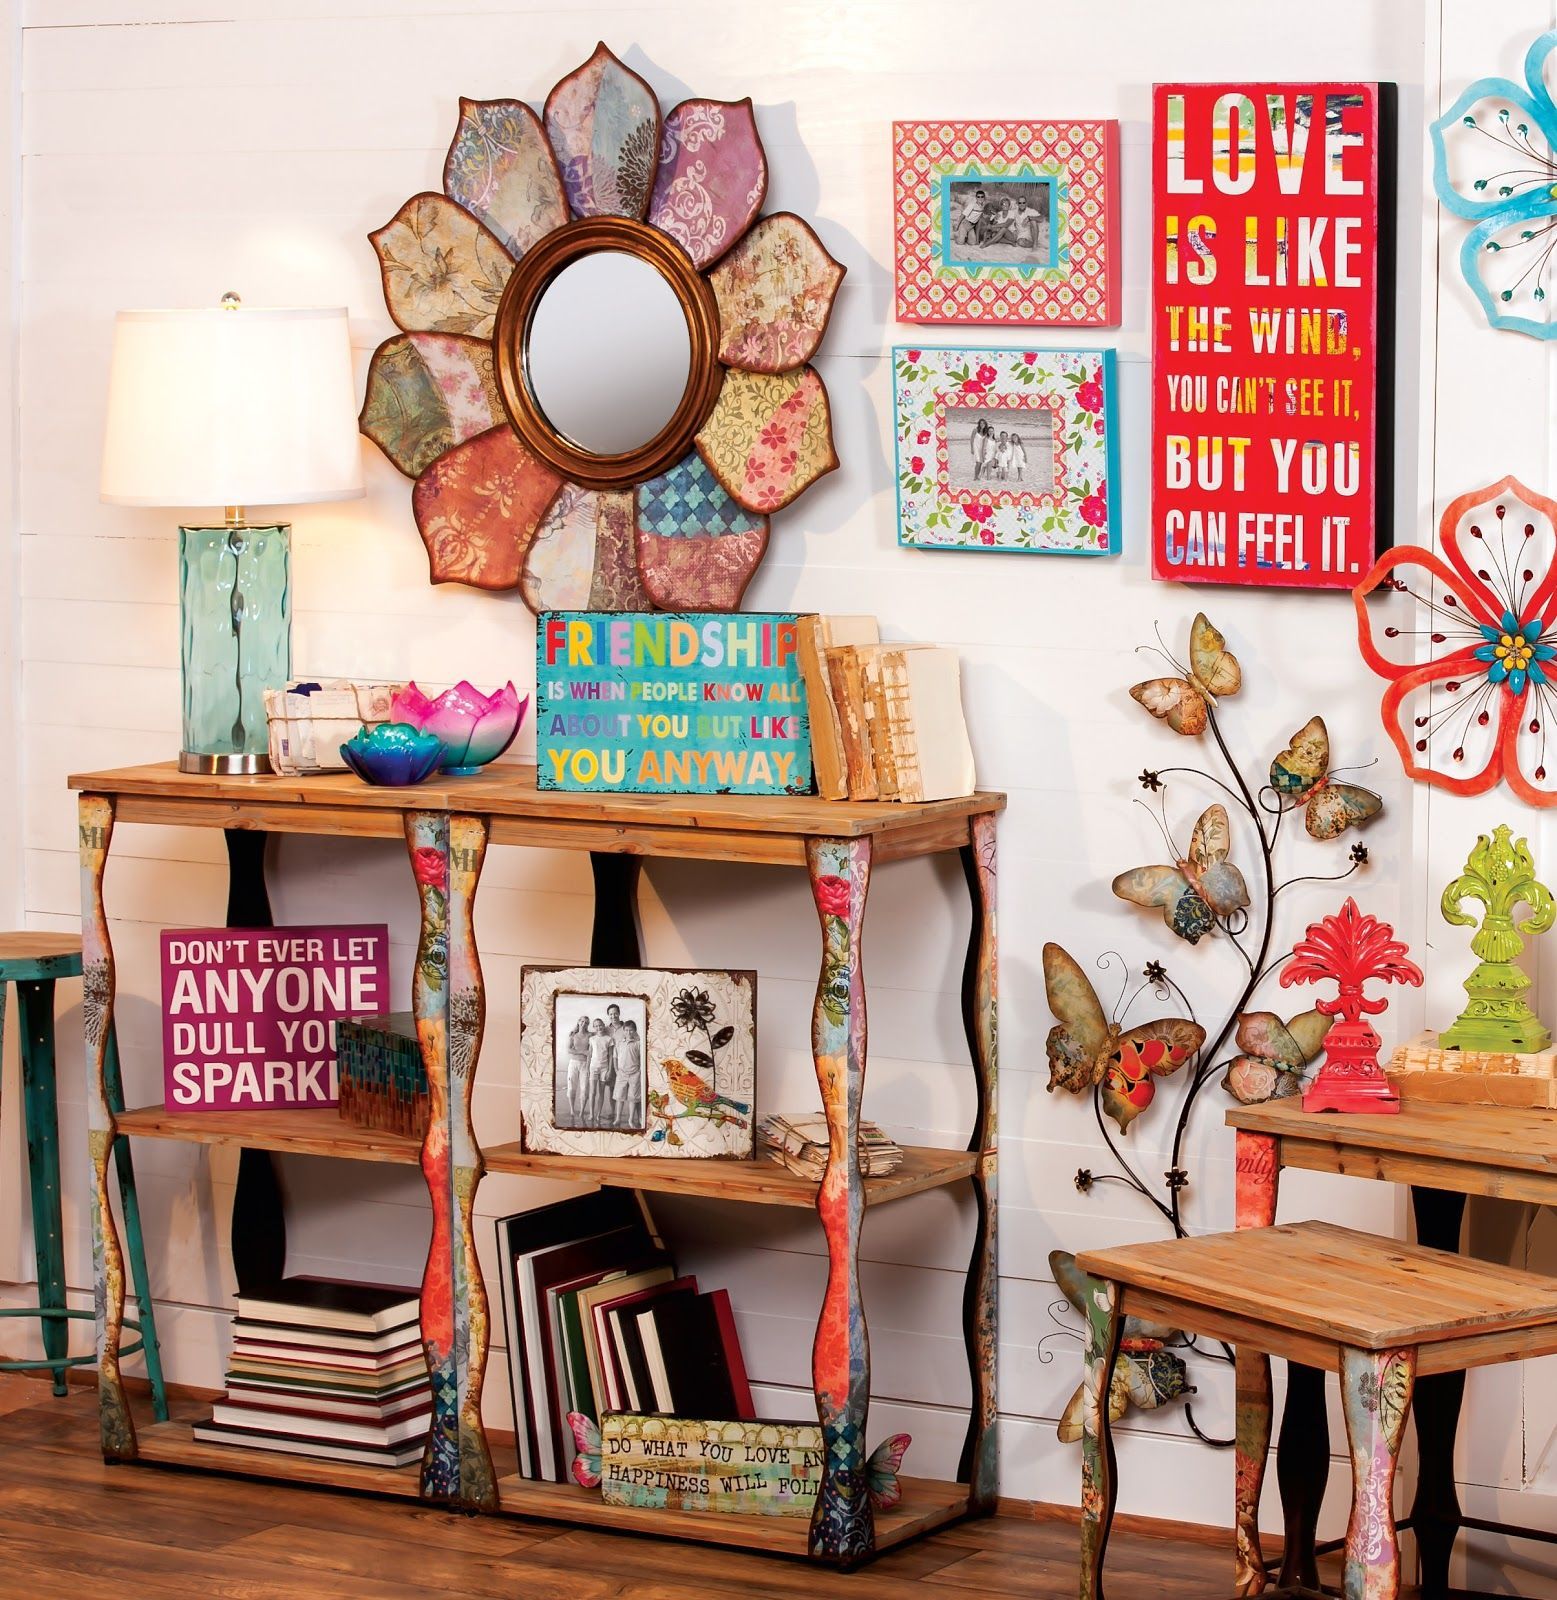 gypsy eclectic home furnishings | ... to 